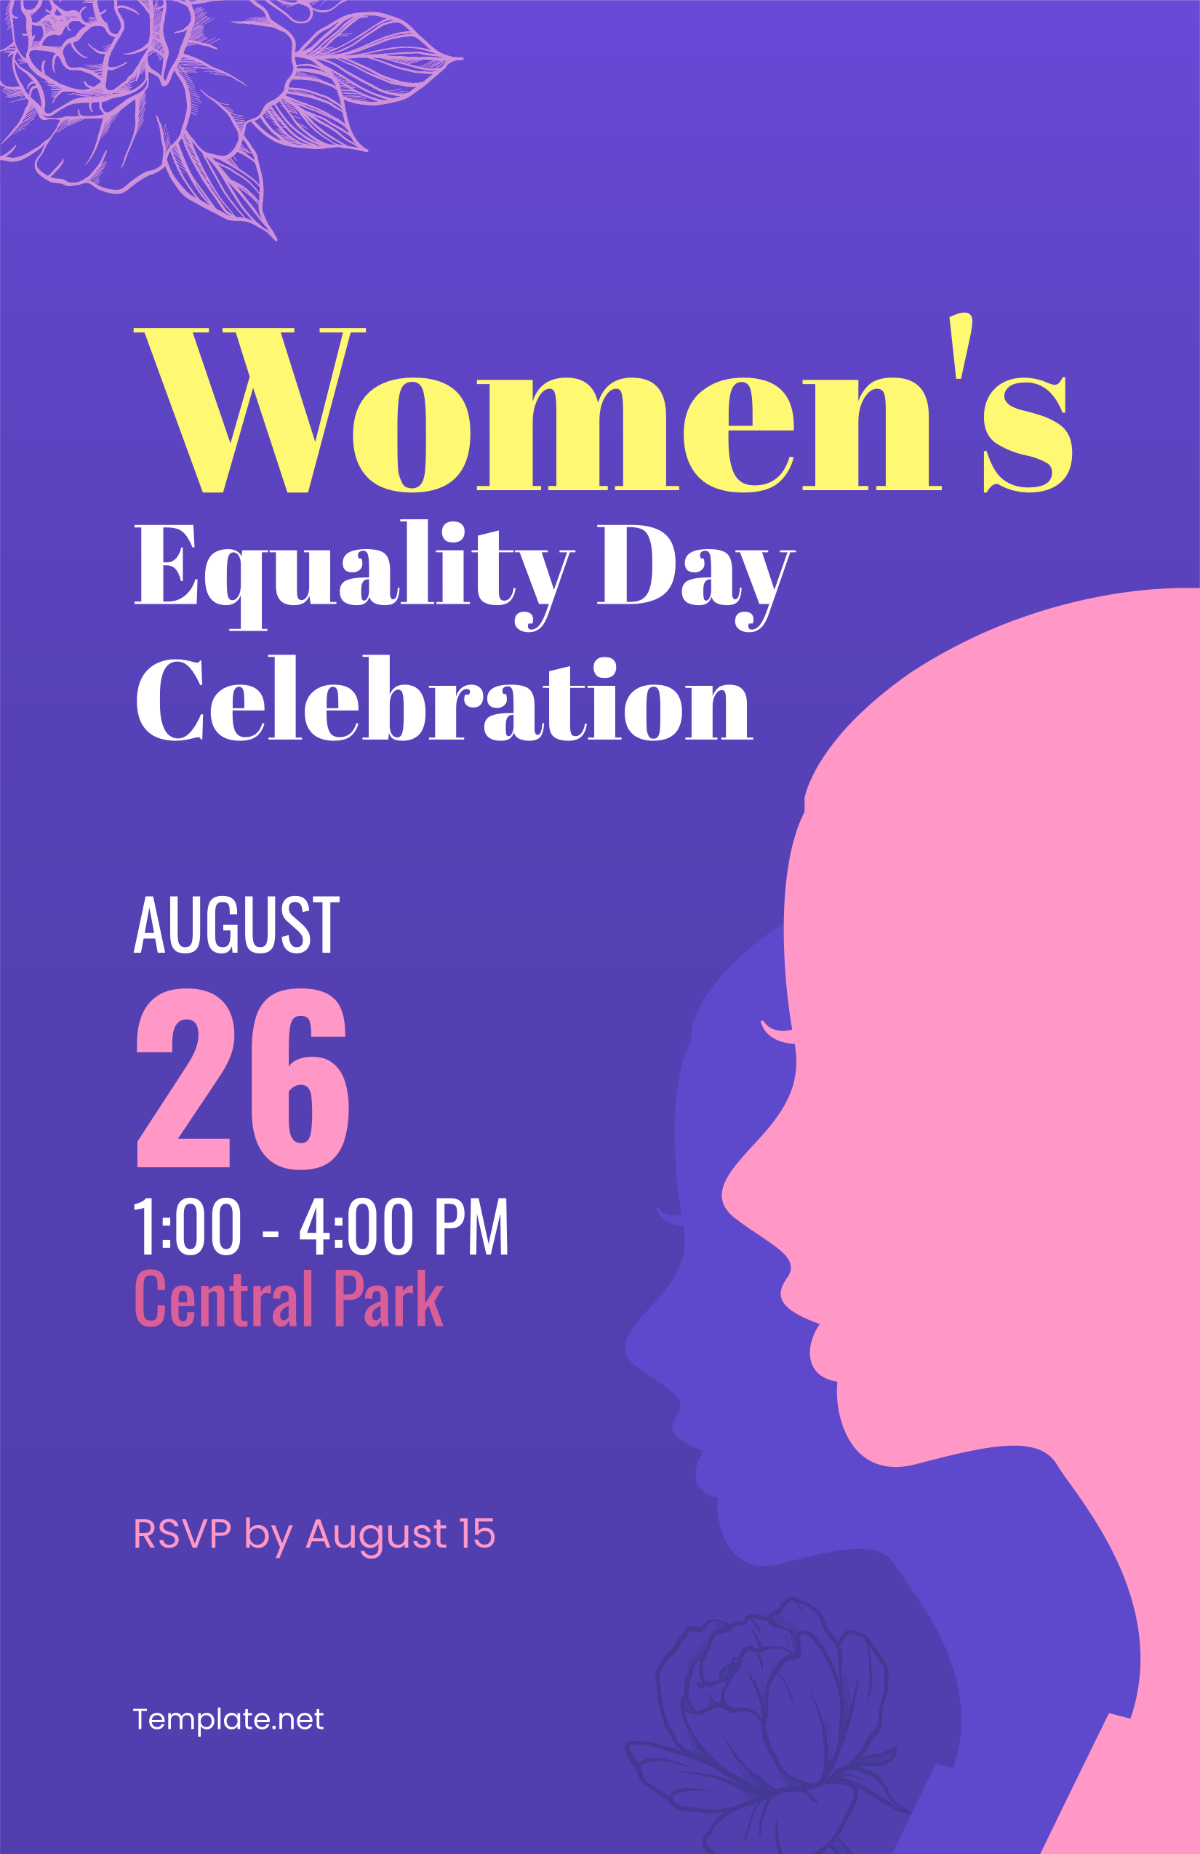 Women's Equality Day Event